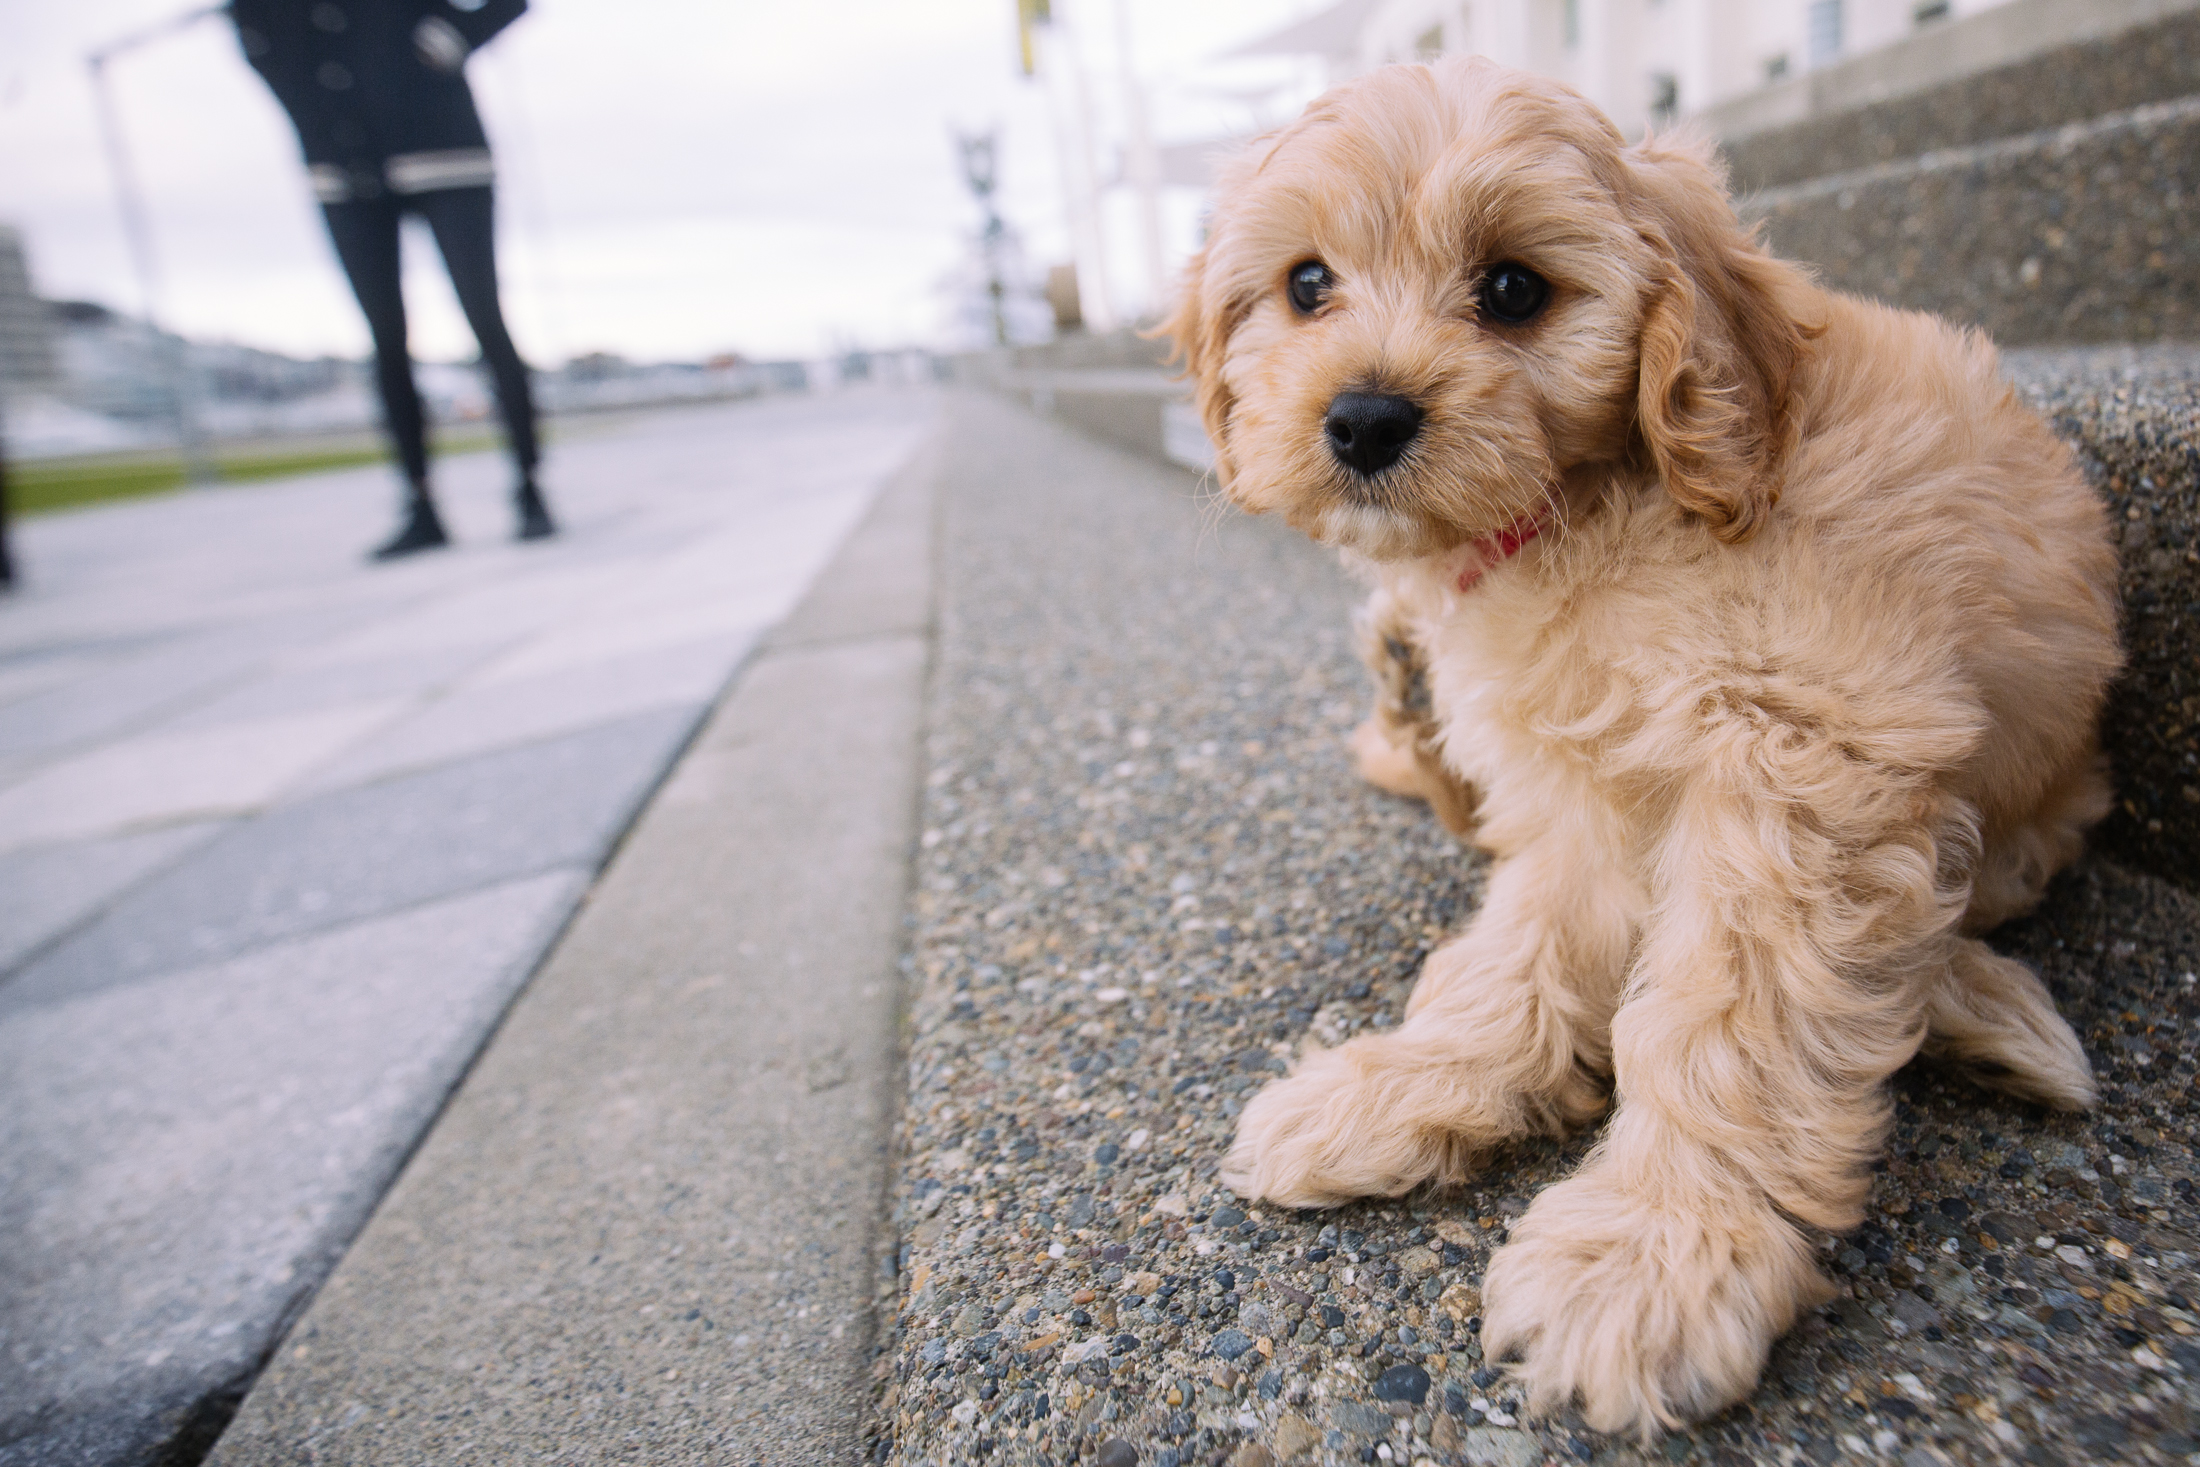 Meet Ollie, the adorable Cavapoo puppy | Seattle Refined